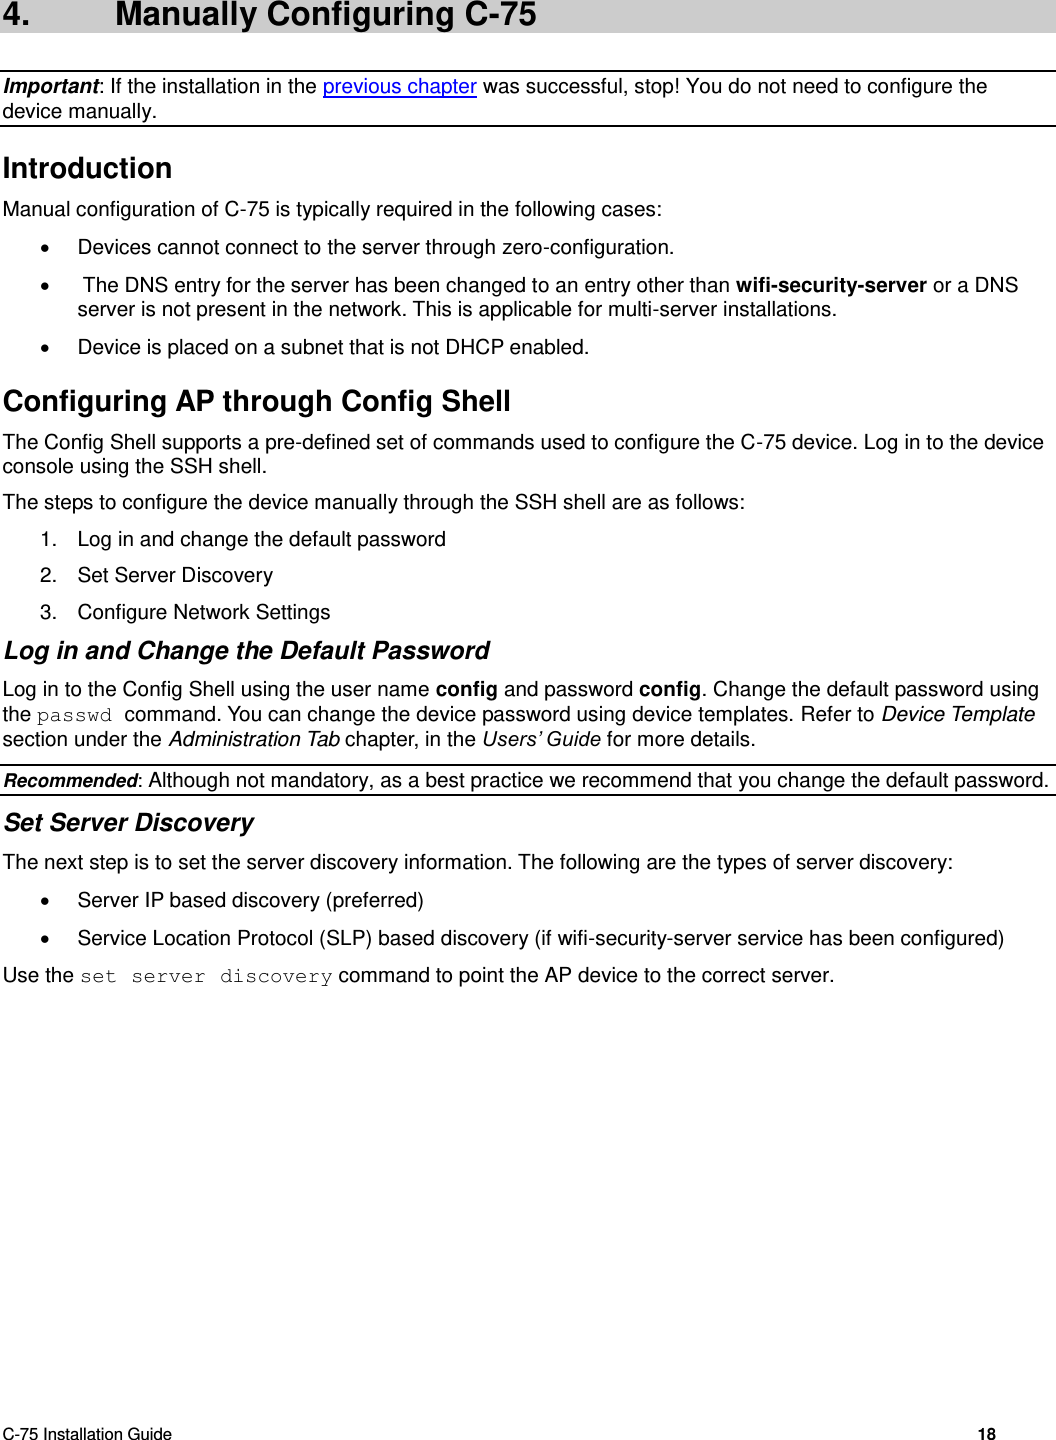  C-75 Installation Guide        18  4.  Manually Configuring C-75 Important: If the installation in the previous chapter was successful, stop! You do not need to configure the device manually. Introduction Manual configuration of C-75 is typically required in the following cases:   Devices cannot connect to the server through zero-configuration.    The DNS entry for the server has been changed to an entry other than wifi-security-server or a DNS server is not present in the network. This is applicable for multi-server installations.   Device is placed on a subnet that is not DHCP enabled. Configuring AP through Config Shell The Config Shell supports a pre-defined set of commands used to configure the C-75 device. Log in to the device console using the SSH shell. The steps to configure the device manually through the SSH shell are as follows: 1.  Log in and change the default password 2.  Set Server Discovery 3.  Configure Network Settings Log in and Change the Default Password Log in to the Config Shell using the user name config and password config. Change the default password using the passwd command. You can change the device password using device templates. Refer to Device Template section under the Administration Tab chapter, in the Users’ Guide for more details. Recommended: Although not mandatory, as a best practice we recommend that you change the default password. Set Server Discovery The next step is to set the server discovery information. The following are the types of server discovery:   Server IP based discovery (preferred)   Service Location Protocol (SLP) based discovery (if wifi-security-server service has been configured) Use the set server discovery command to point the AP device to the correct server. 